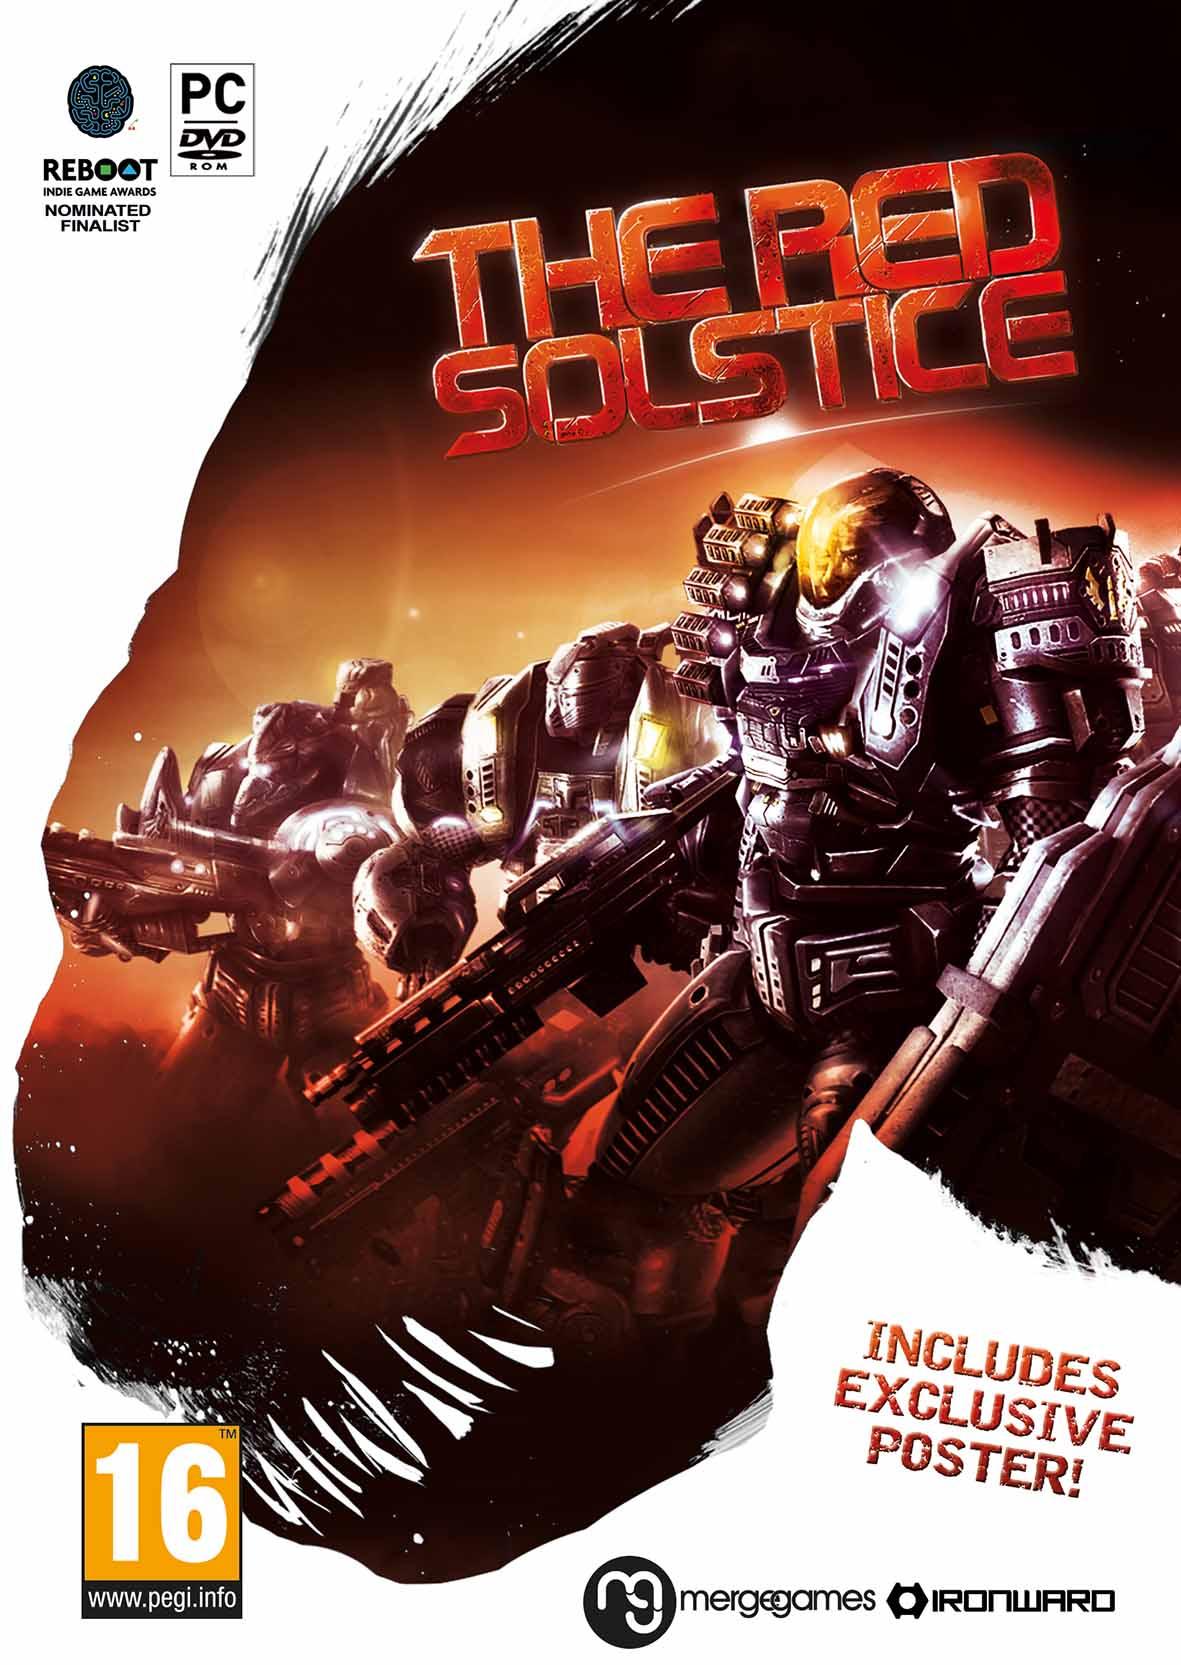 The Red Solstice (PC), Merge Games